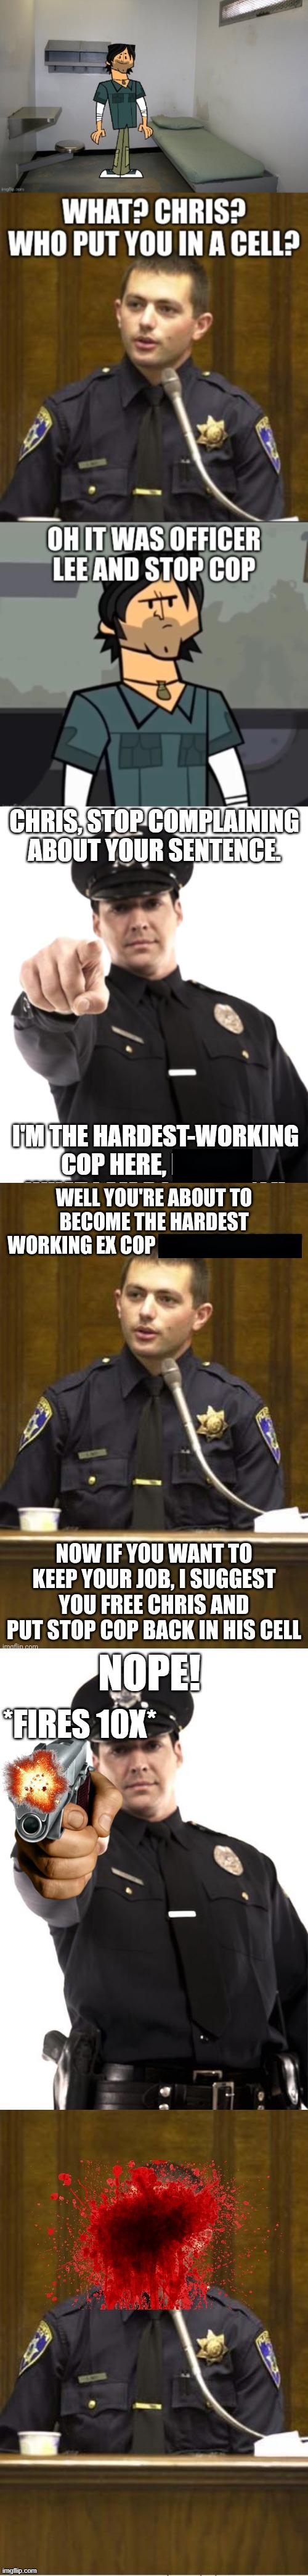 Schnawg didn't listen to my other image | NOPE! *FIRES 10X* | image tagged in police | made w/ Imgflip meme maker